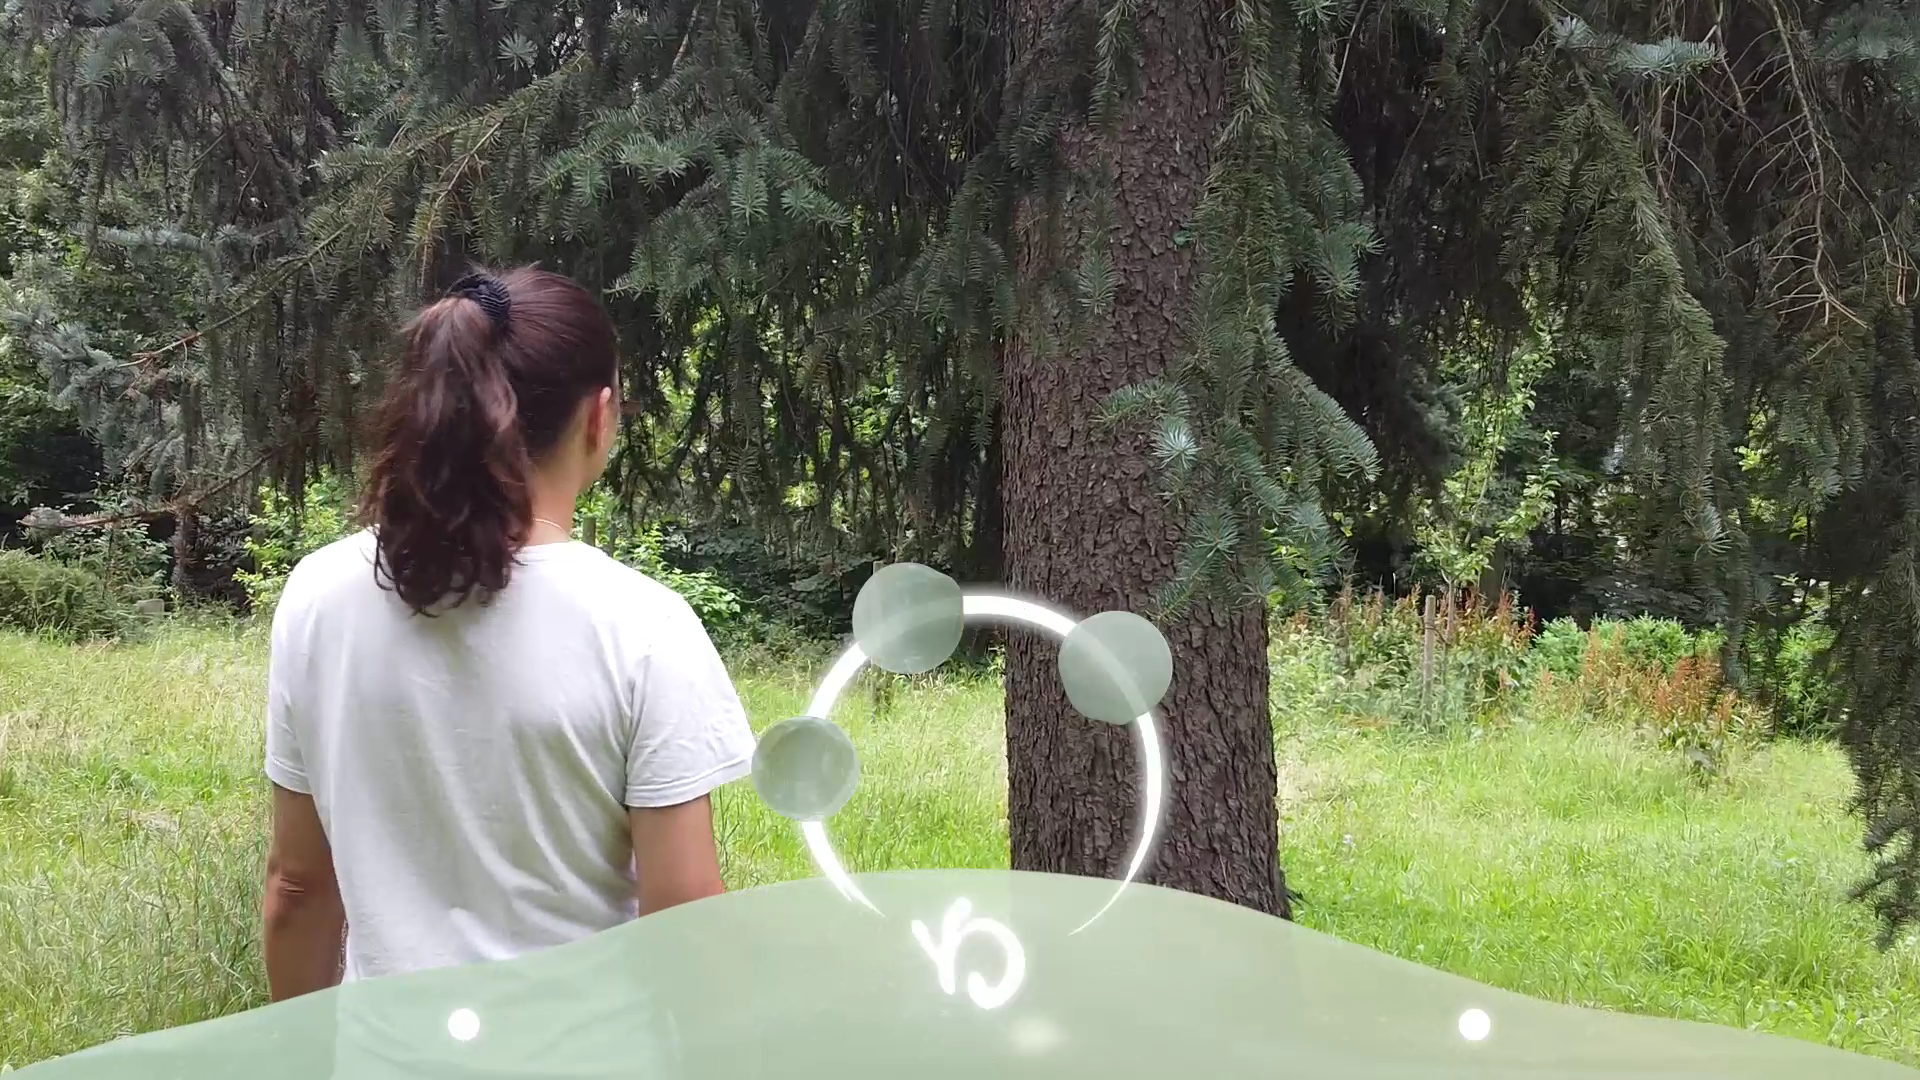 Screenshot from the video, Eve is in third person view inspecting a pine tree. the overlay is soft green and slightly translucent, with no recognizable words, only abstract glyphs